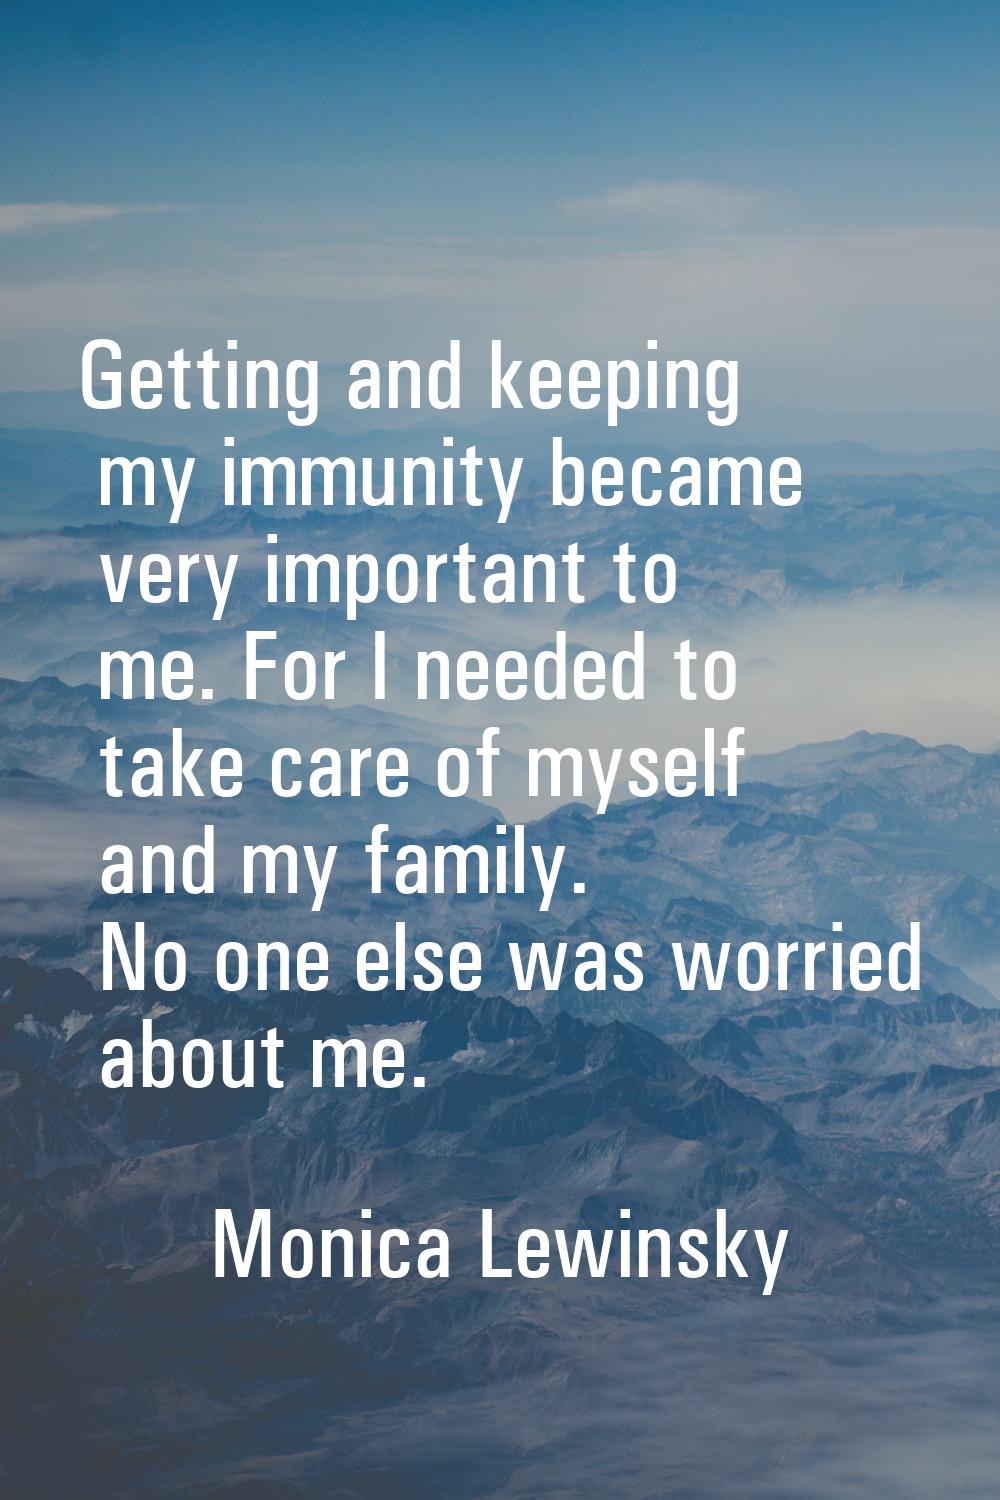 Getting and keeping my immunity became very important to me. For I needed to take care of myself an